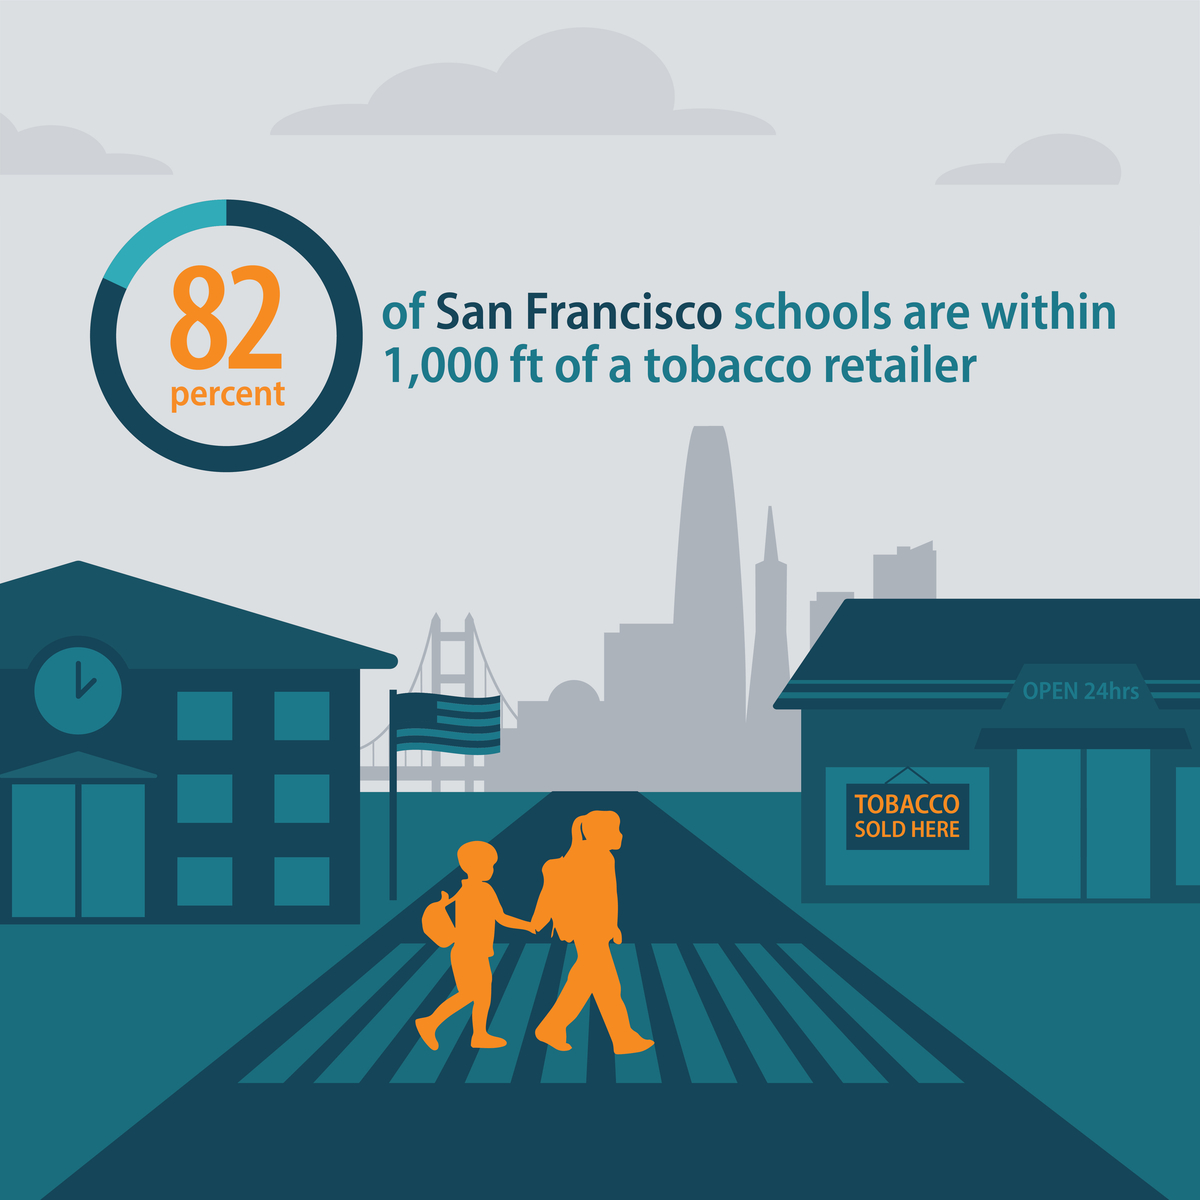 82 percent of San Francisco schools are within 1,000 feet of a tobacco retailer